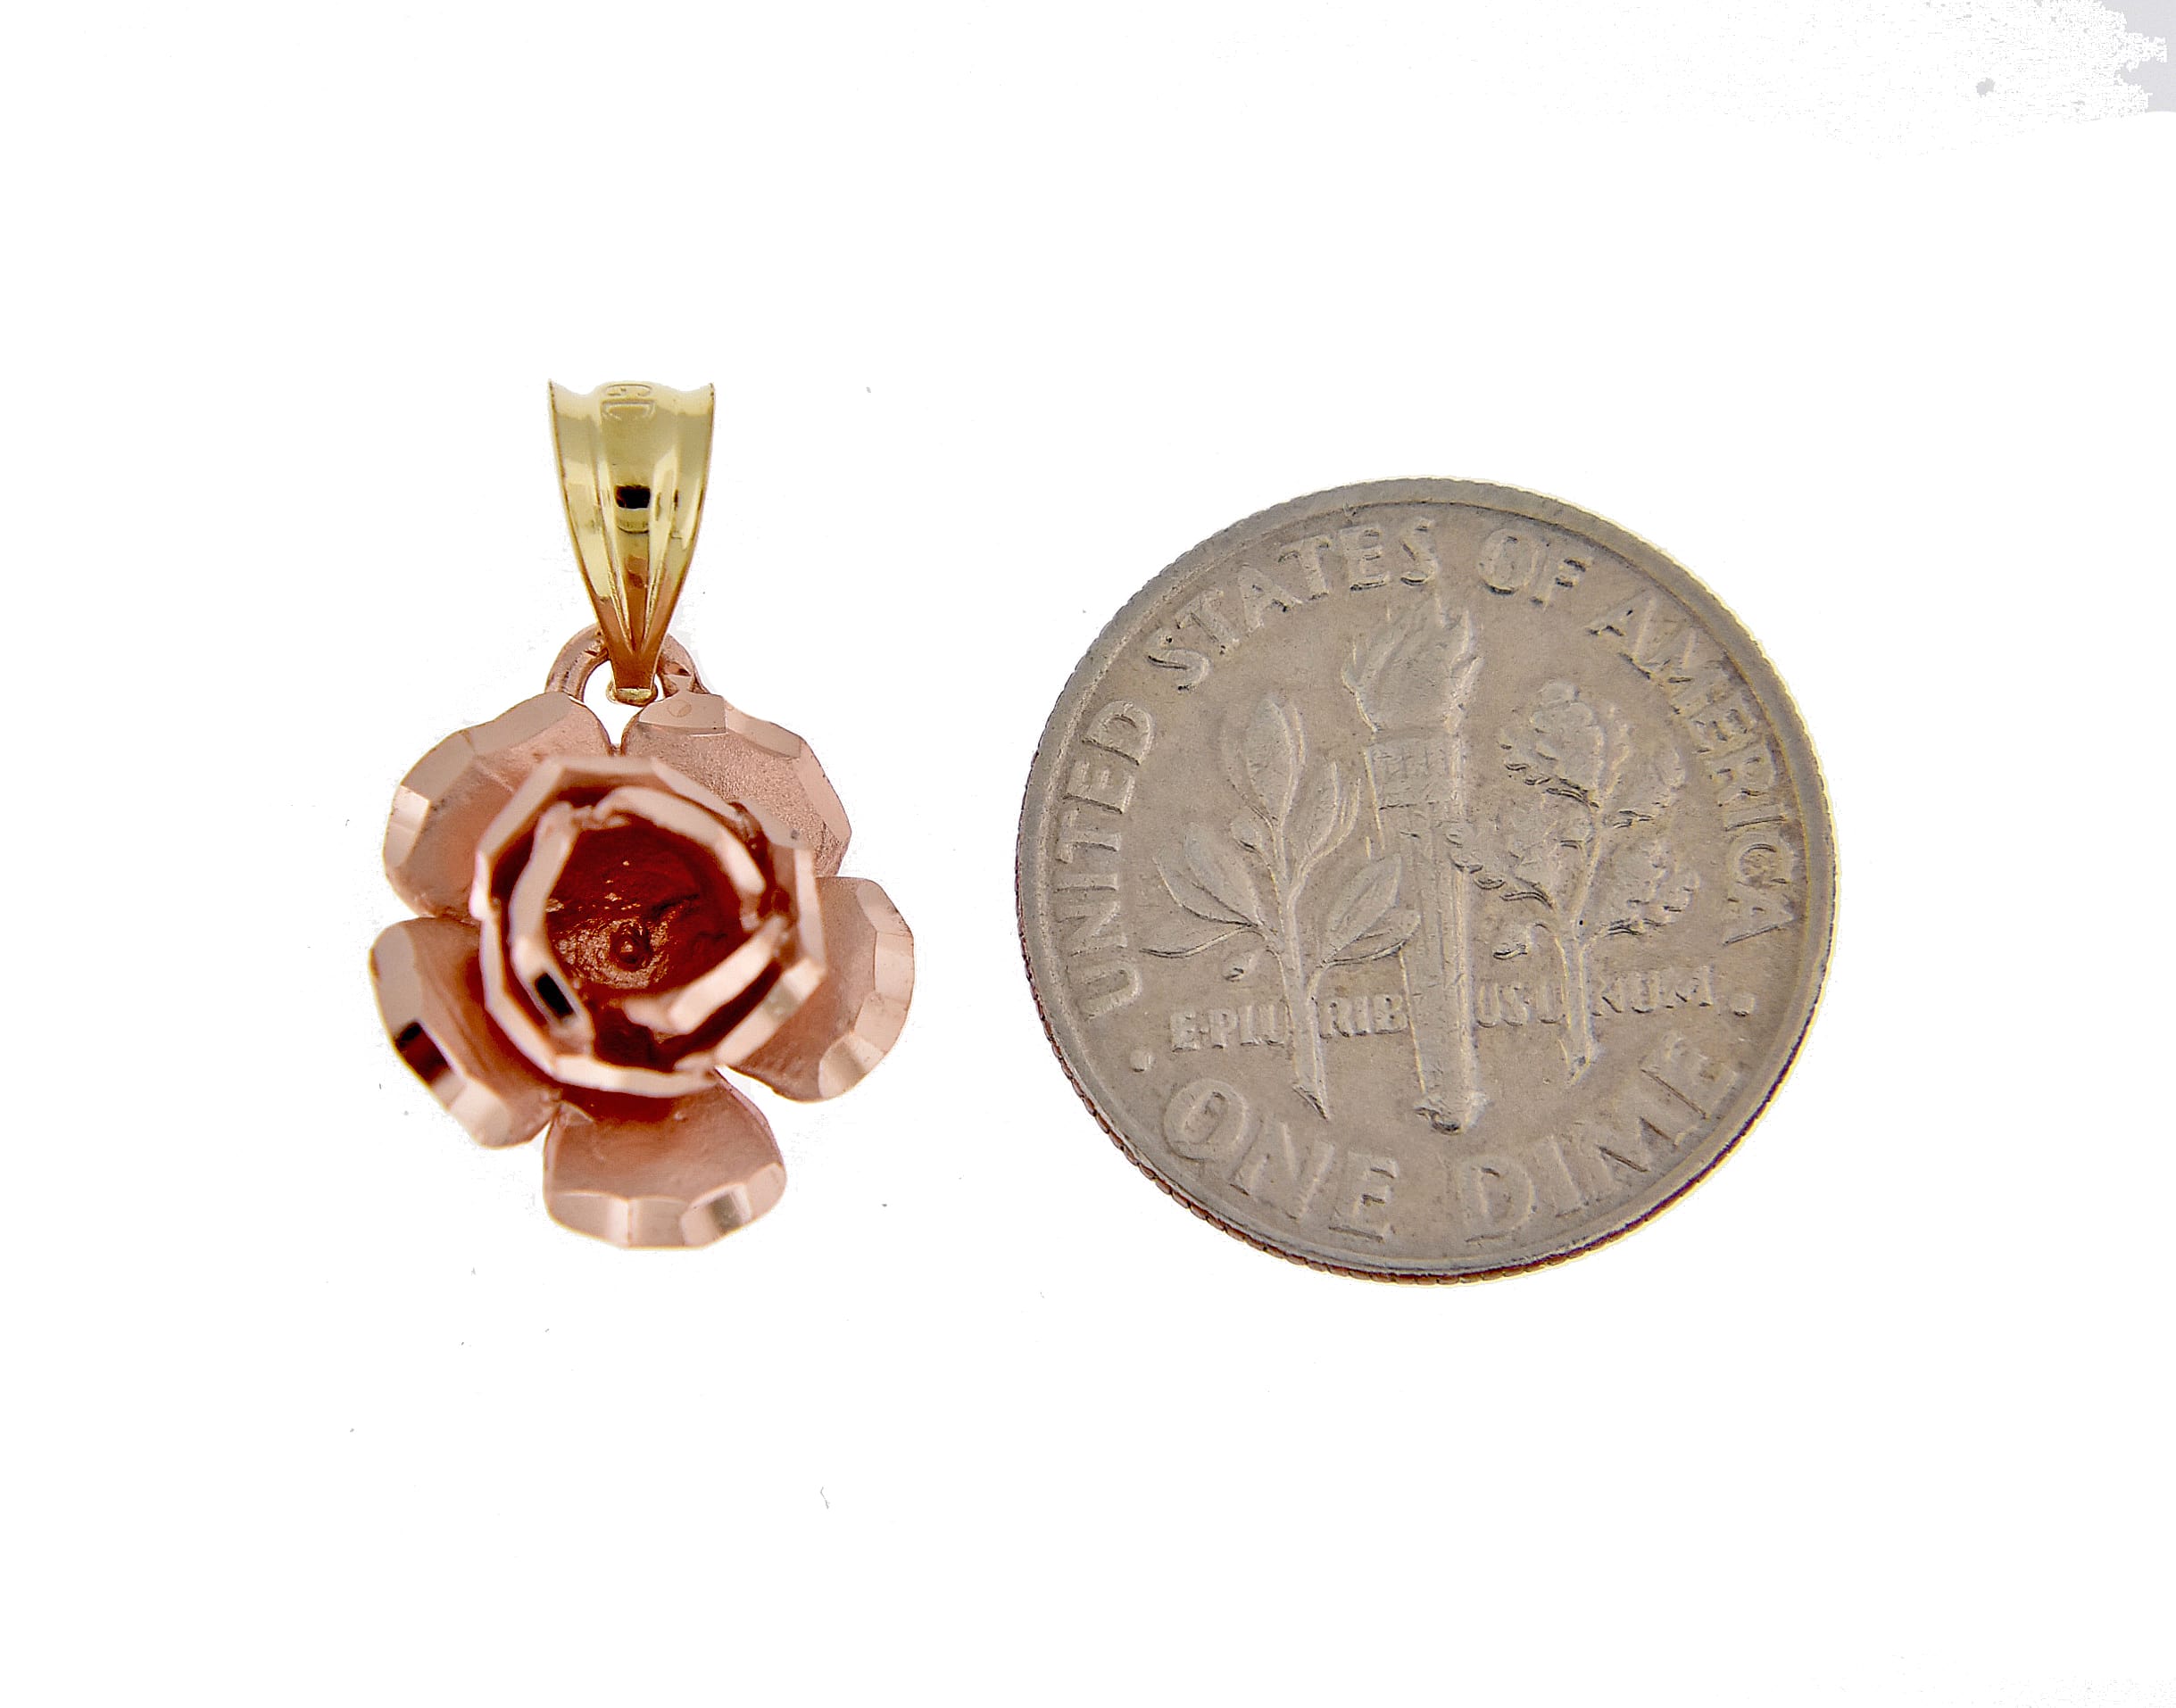 14k Gold Two Tone Small Rose Flower Pendant Charm